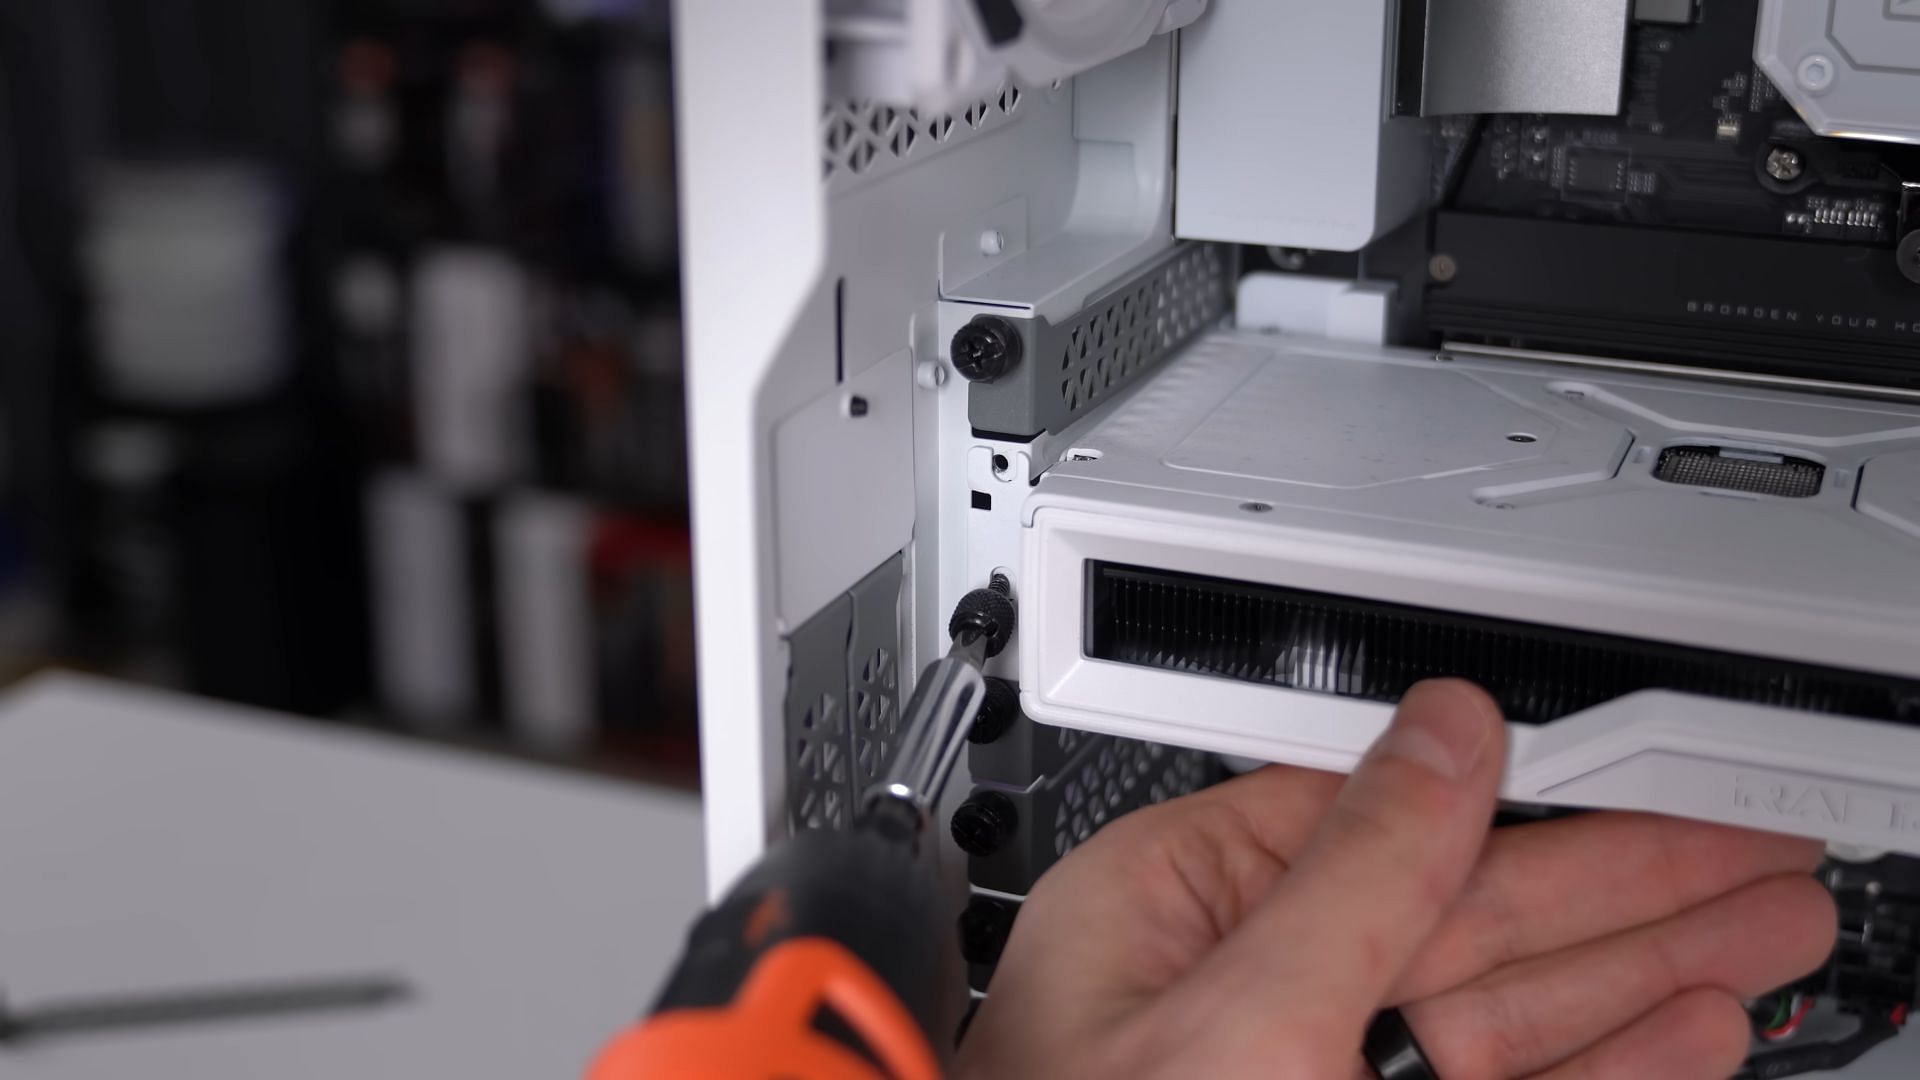 The GPU is installed and getting screwed in (Image via TechSource/YouTube)